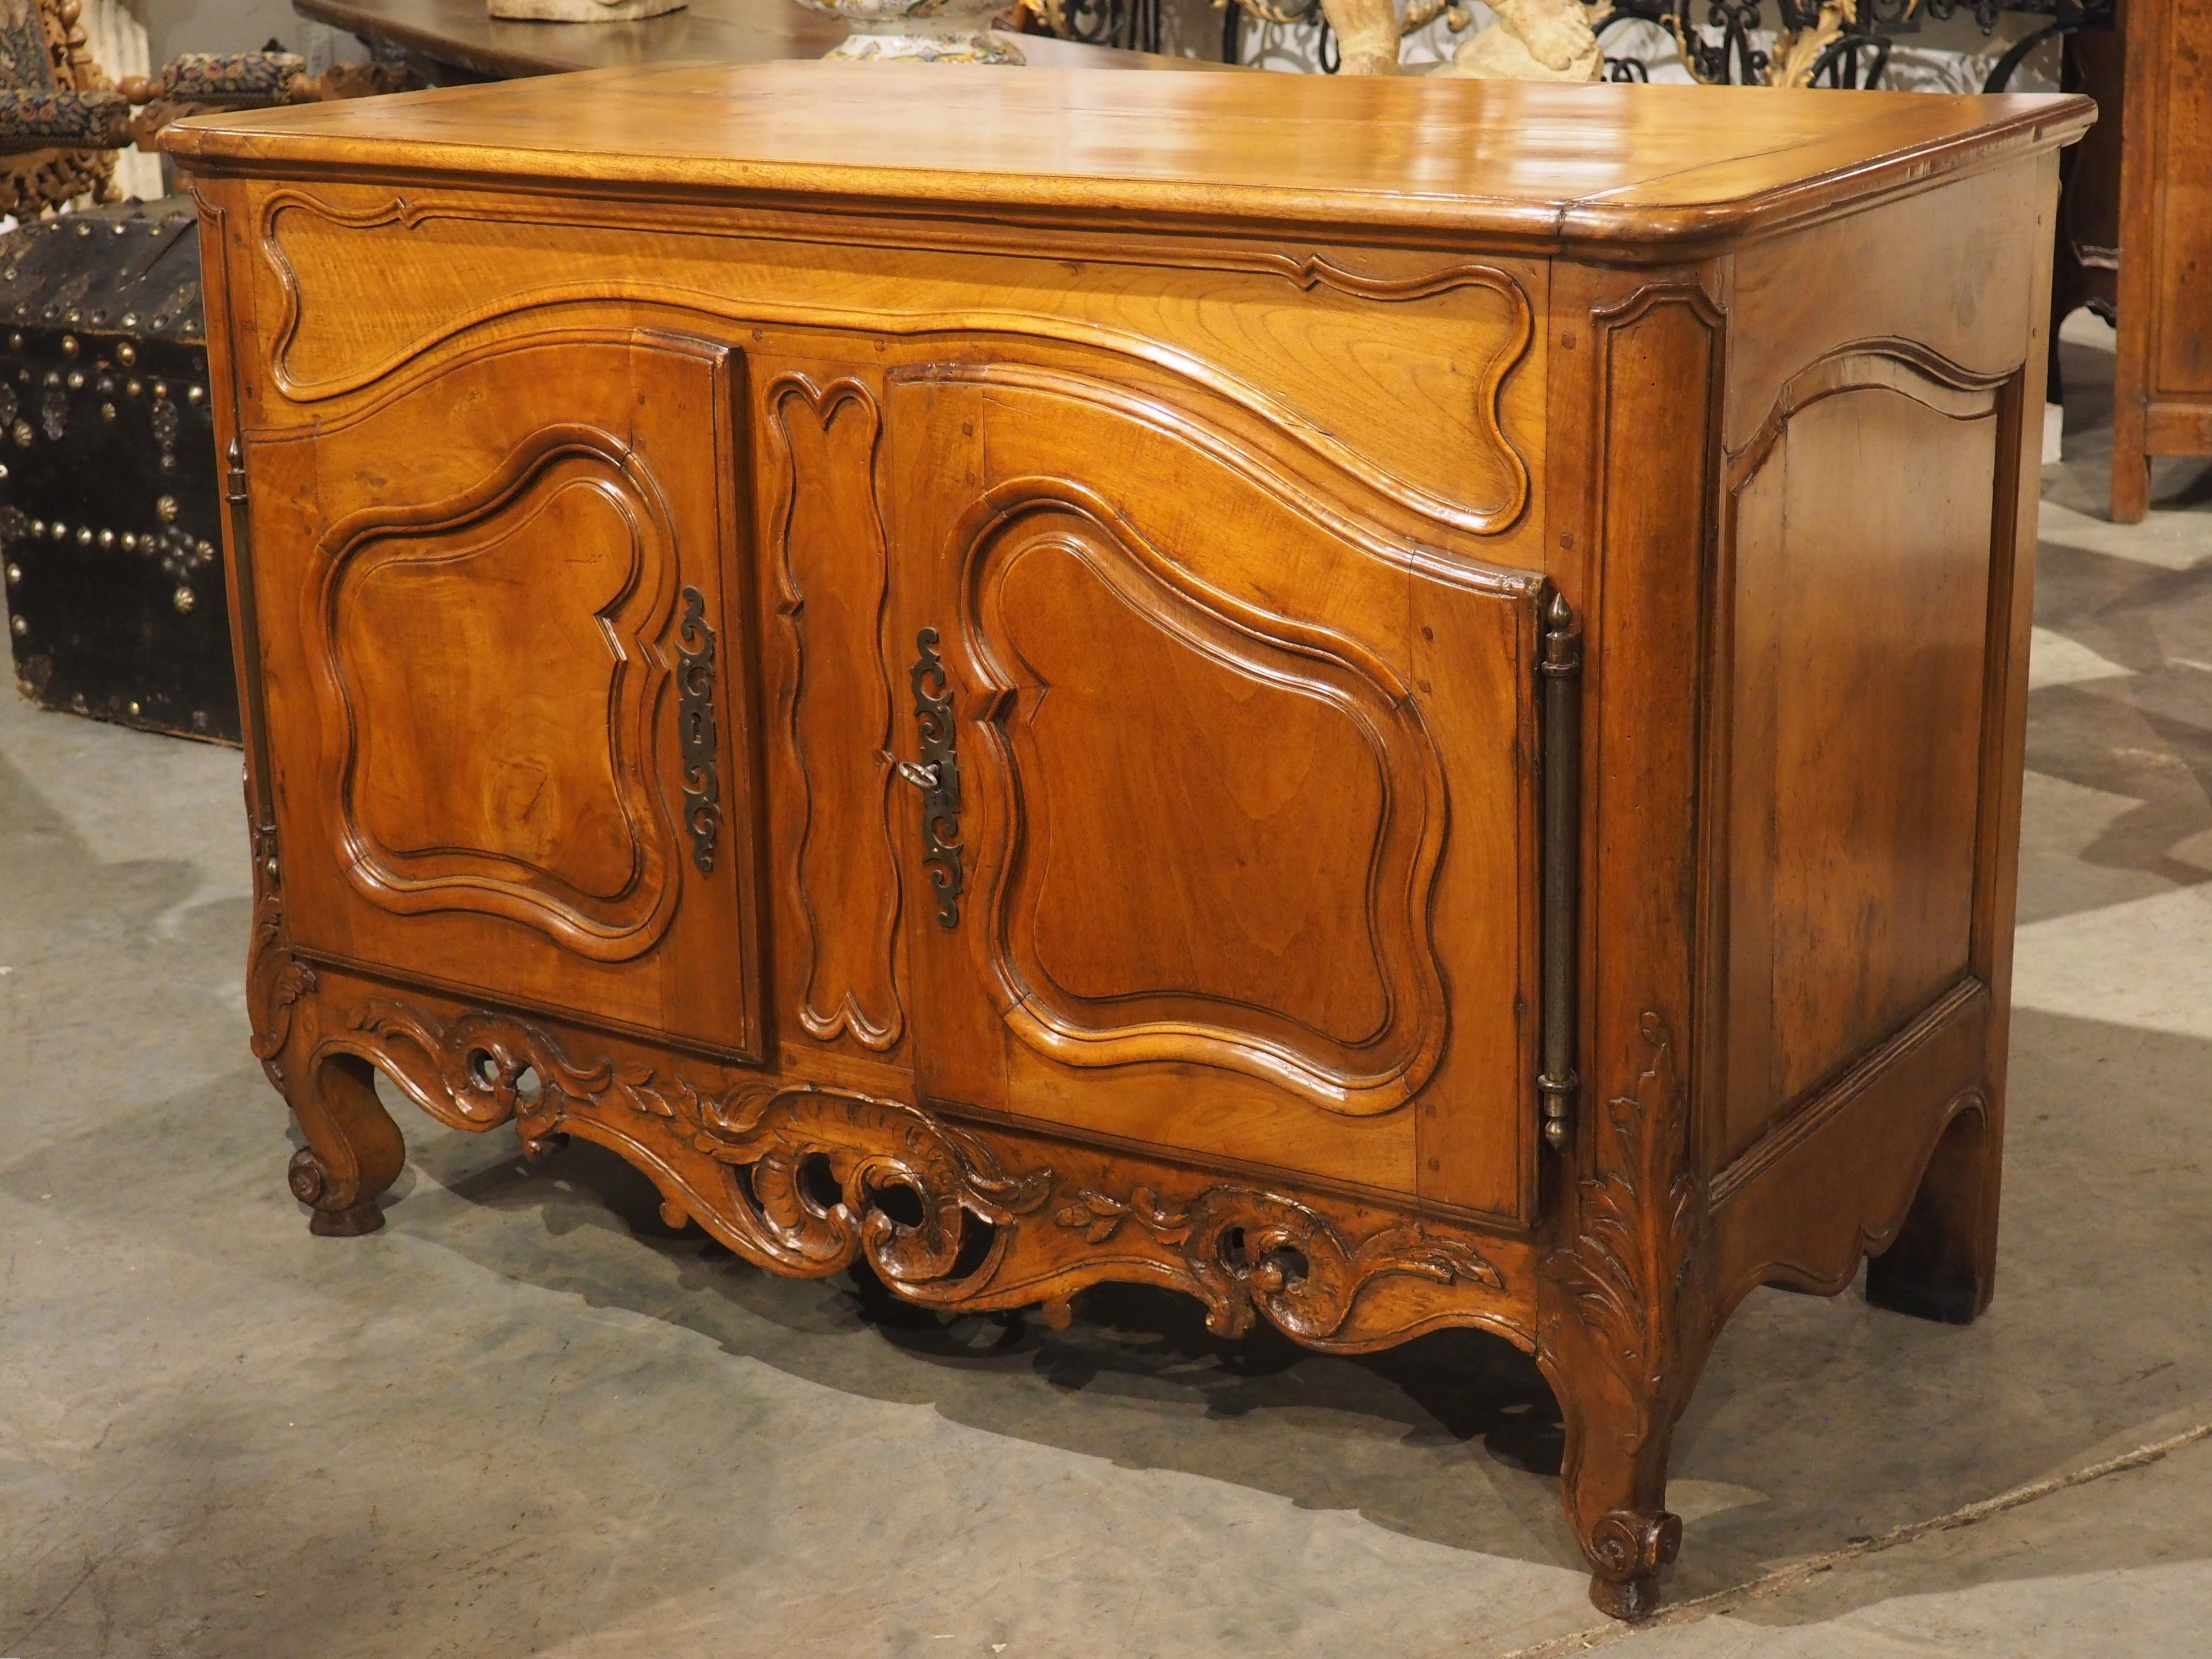 Circa 1750 Carved Walnut Wood Buffet Crédence from Nîmes, France 12